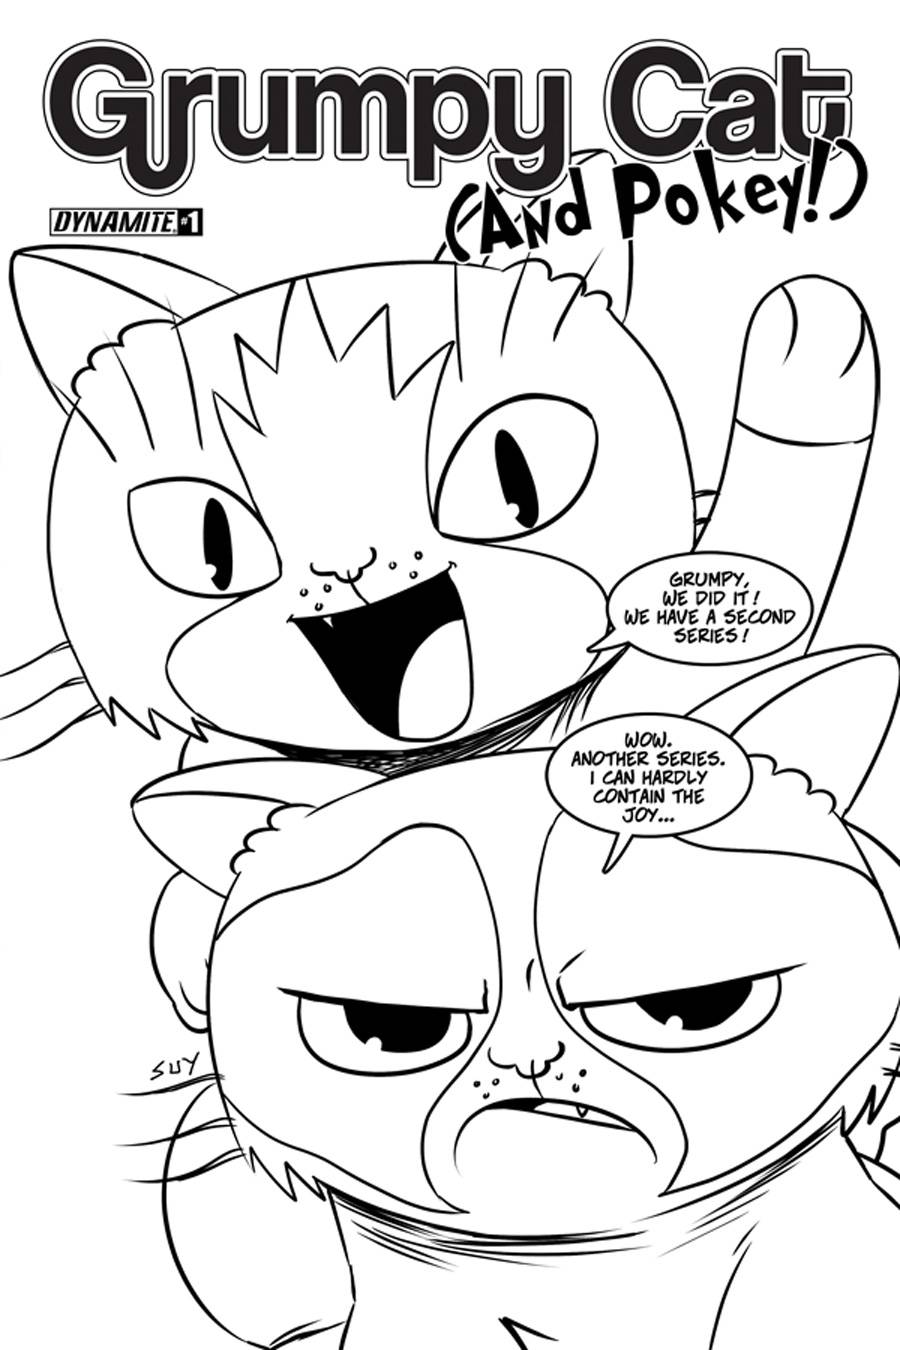  Grumpy  Cat  and Pokey 1 Coloring  Book Cover Fresh 